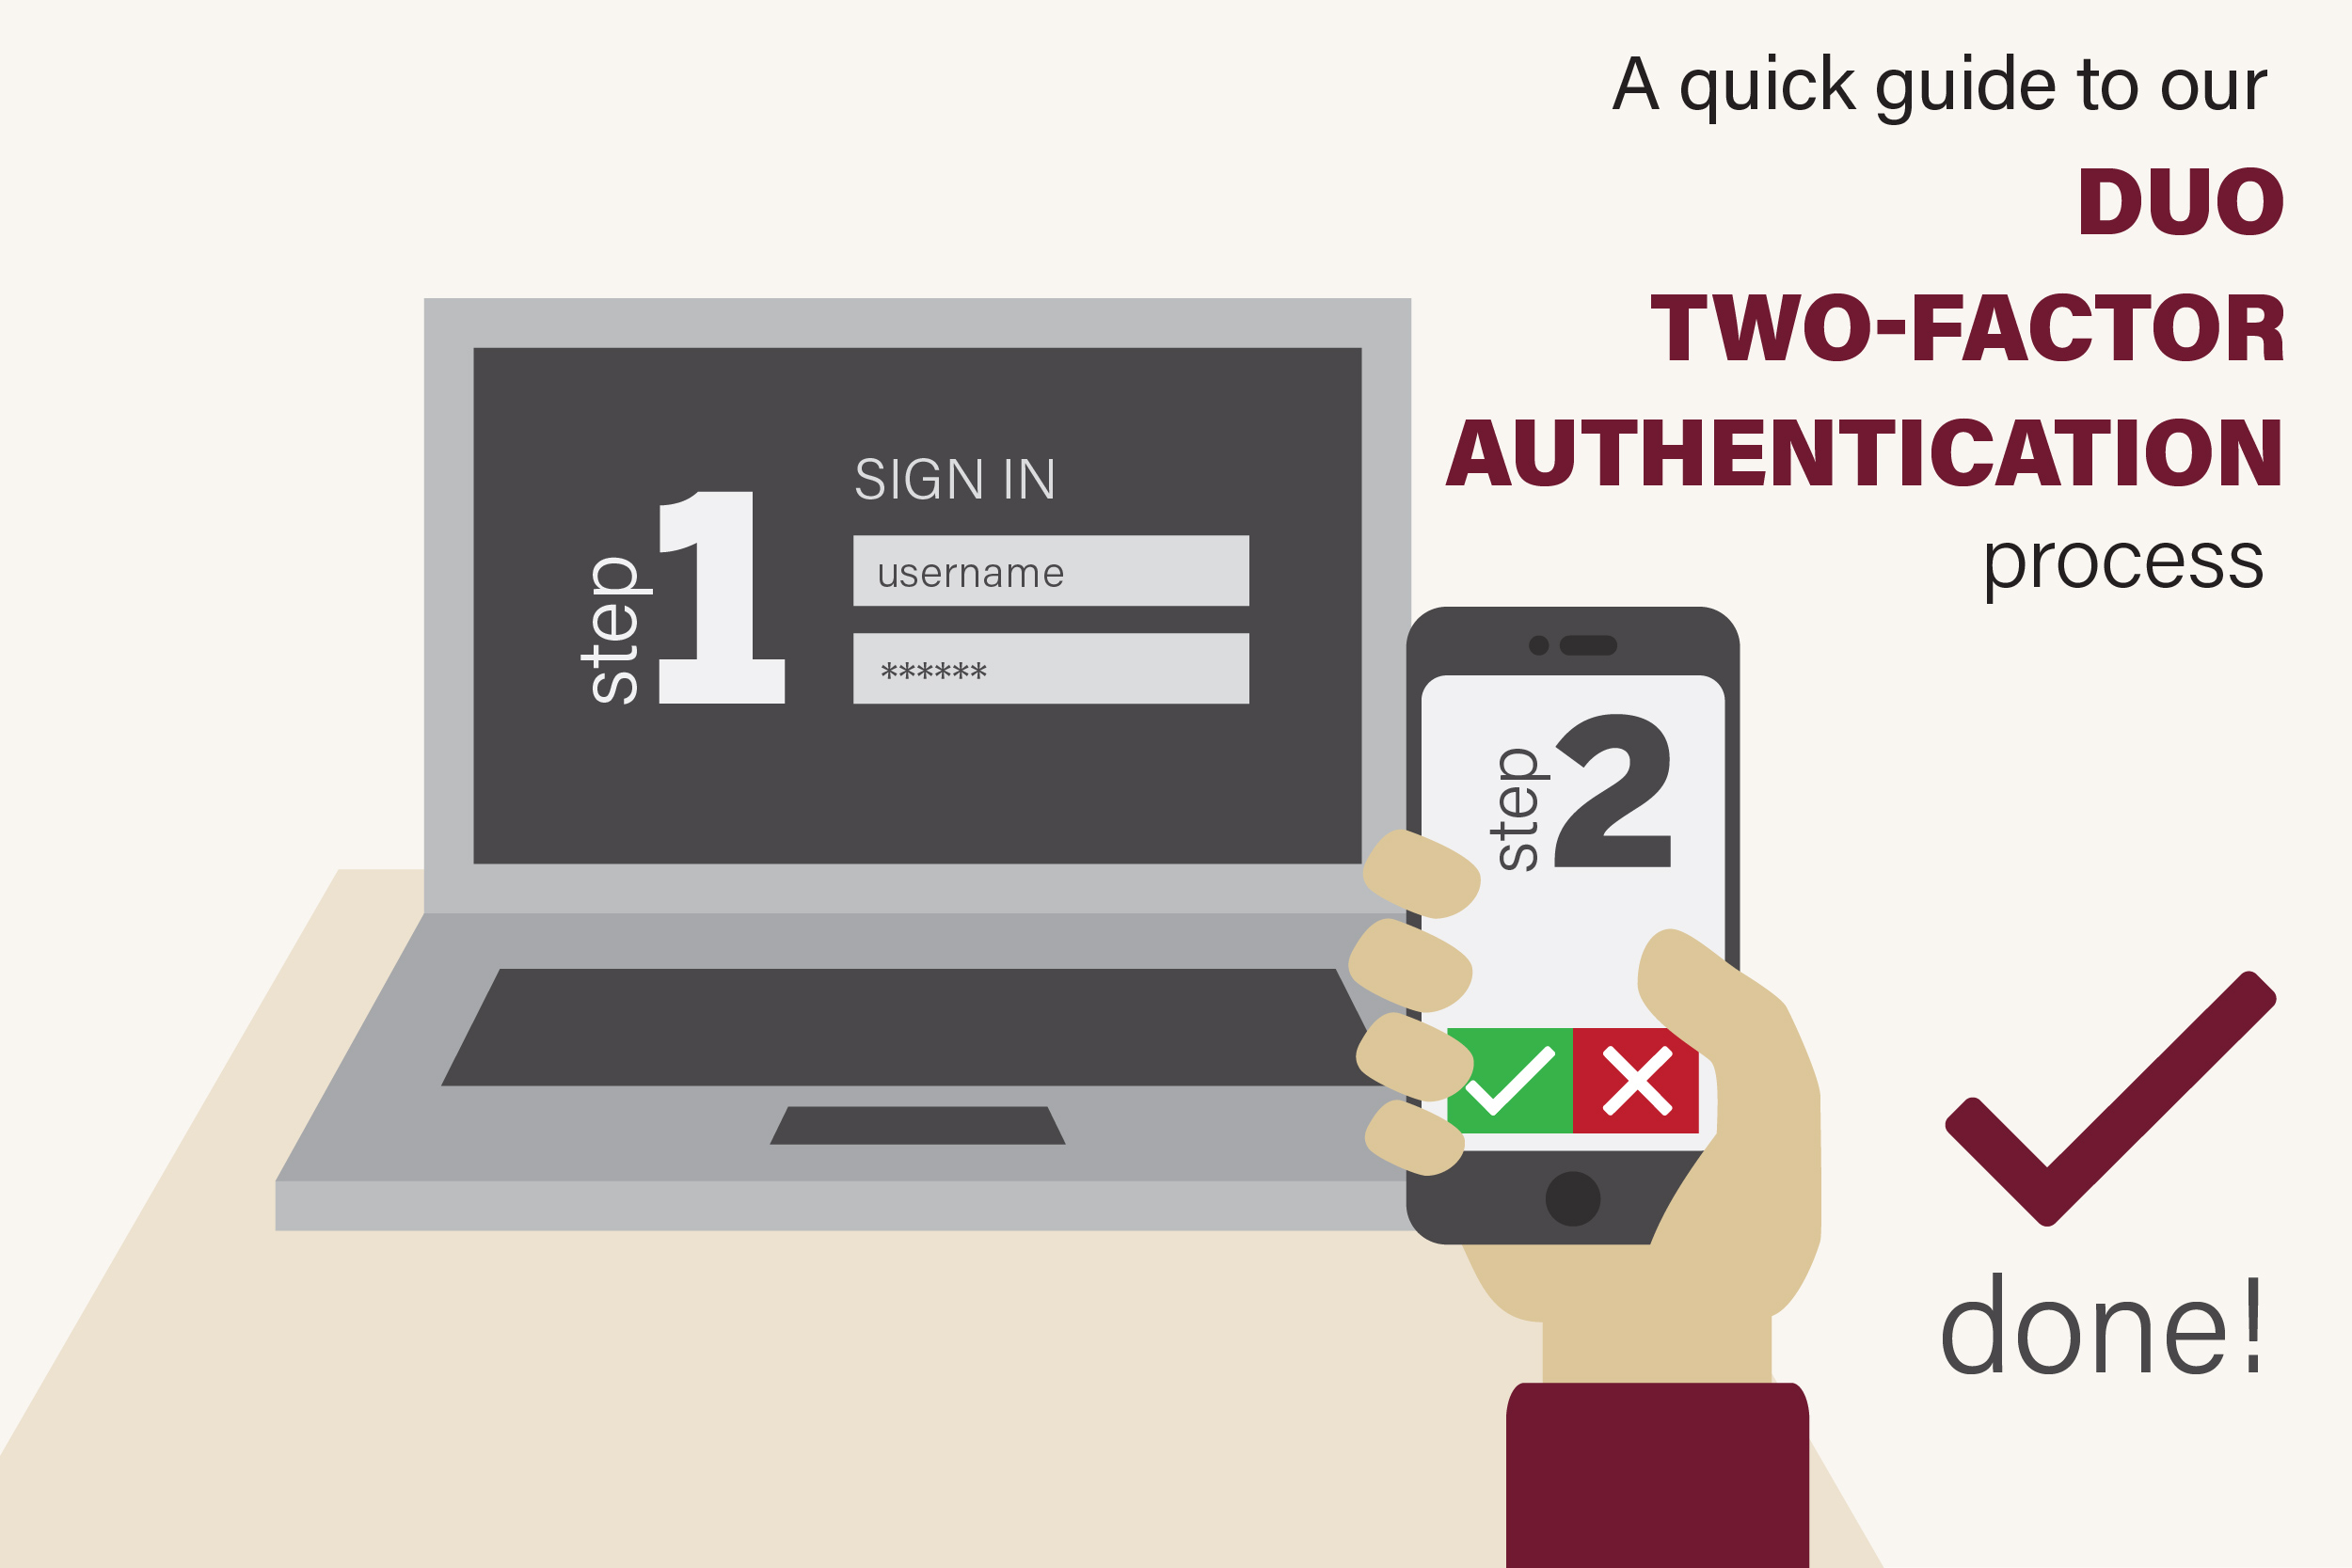 Illustration of 2FA sign-in process